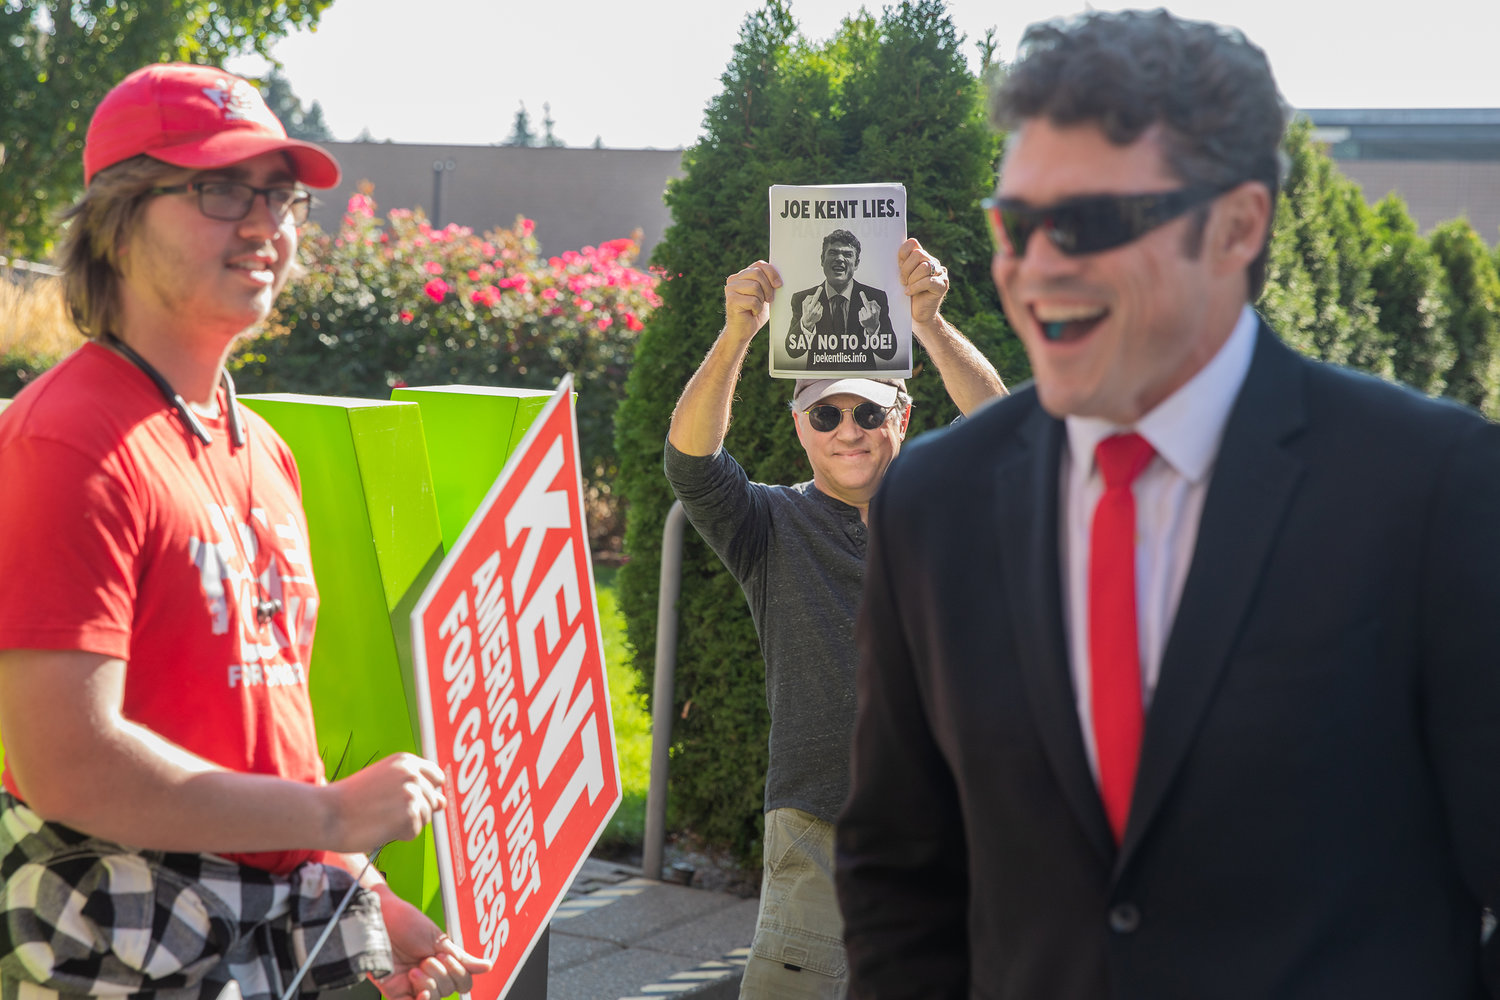 Joe Kent smiles alongside supporters and protesters outside the Vancouver Community Library last month ahead of the Congressional 3rd District Debate.